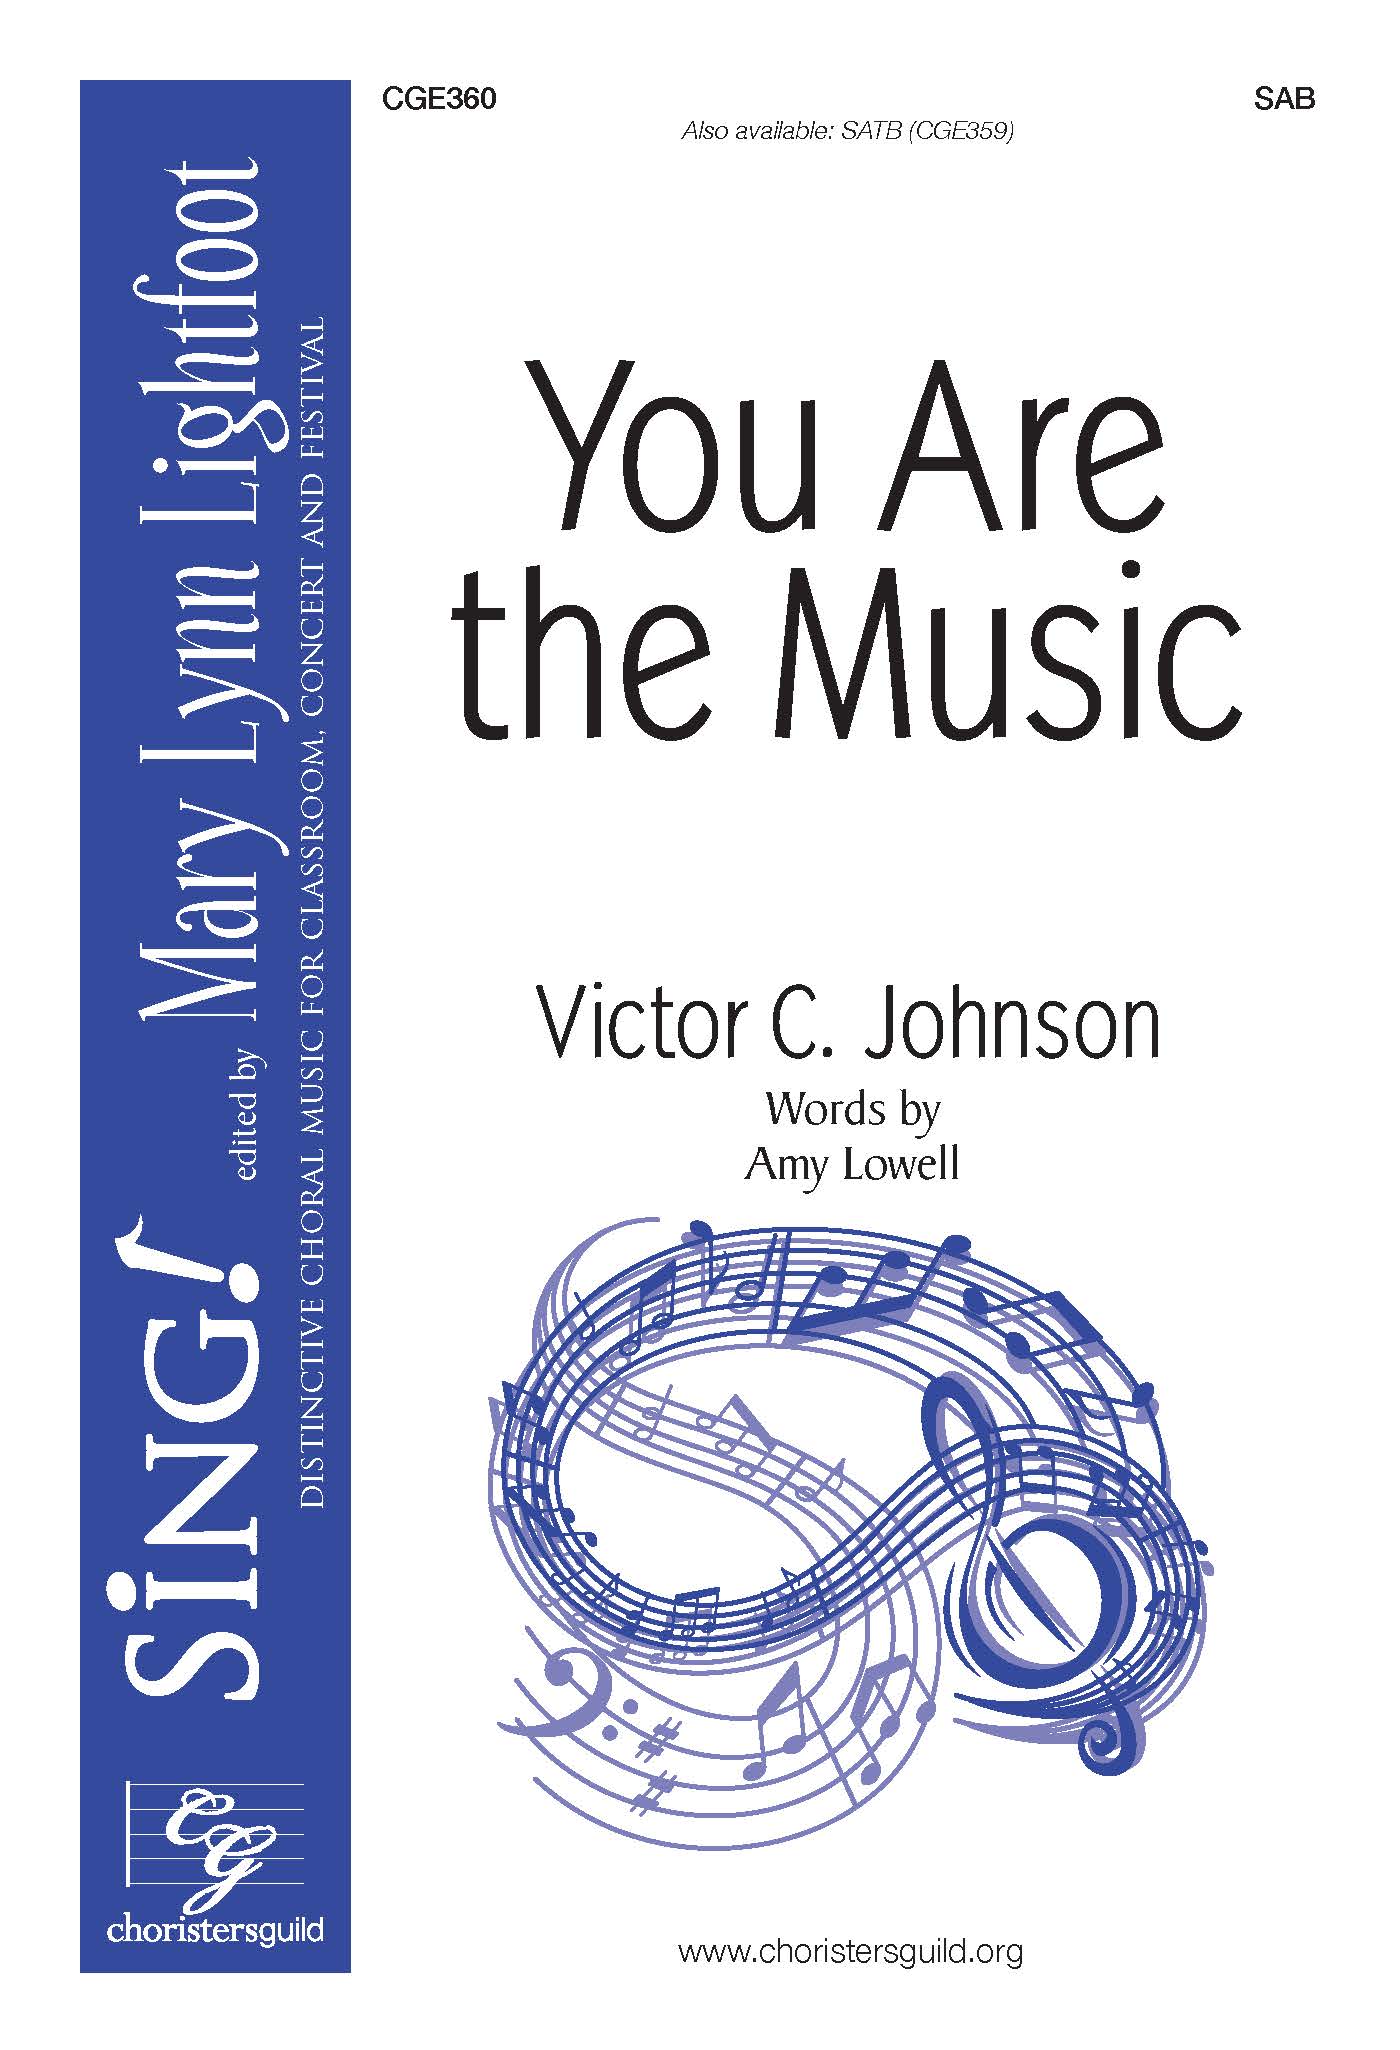 You Are the Music - SAB